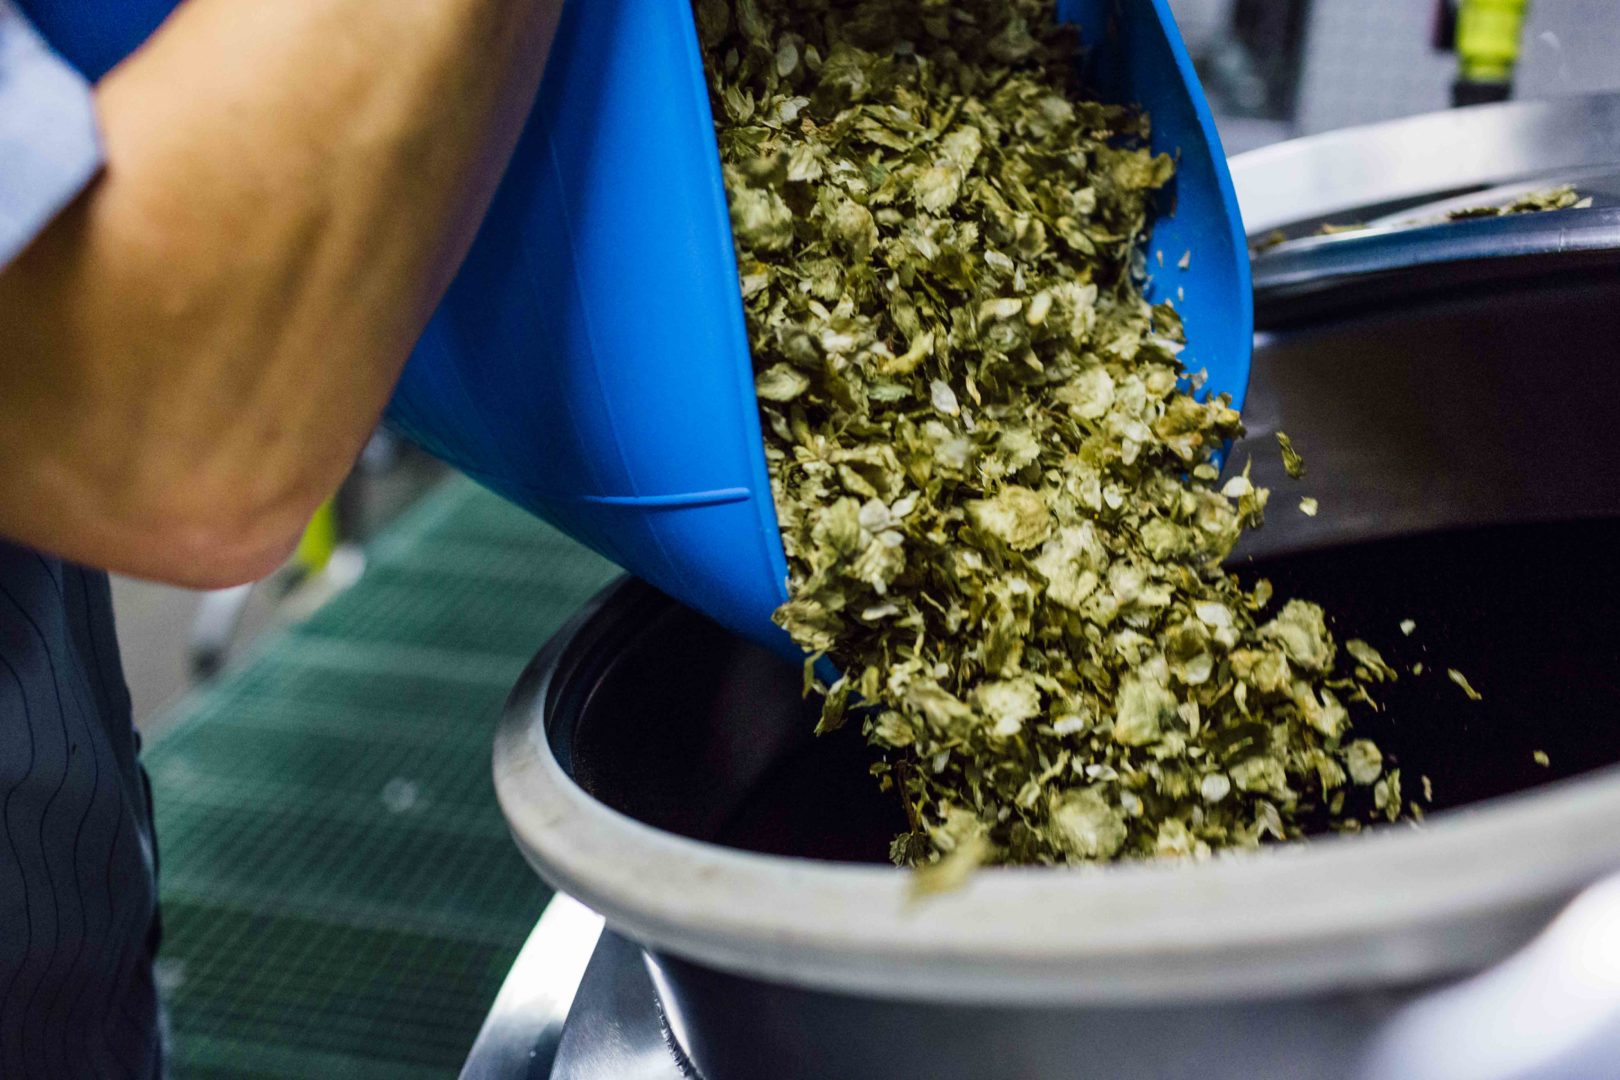 Aged hops go into a batch of Allagash Brewing Company coolship beer